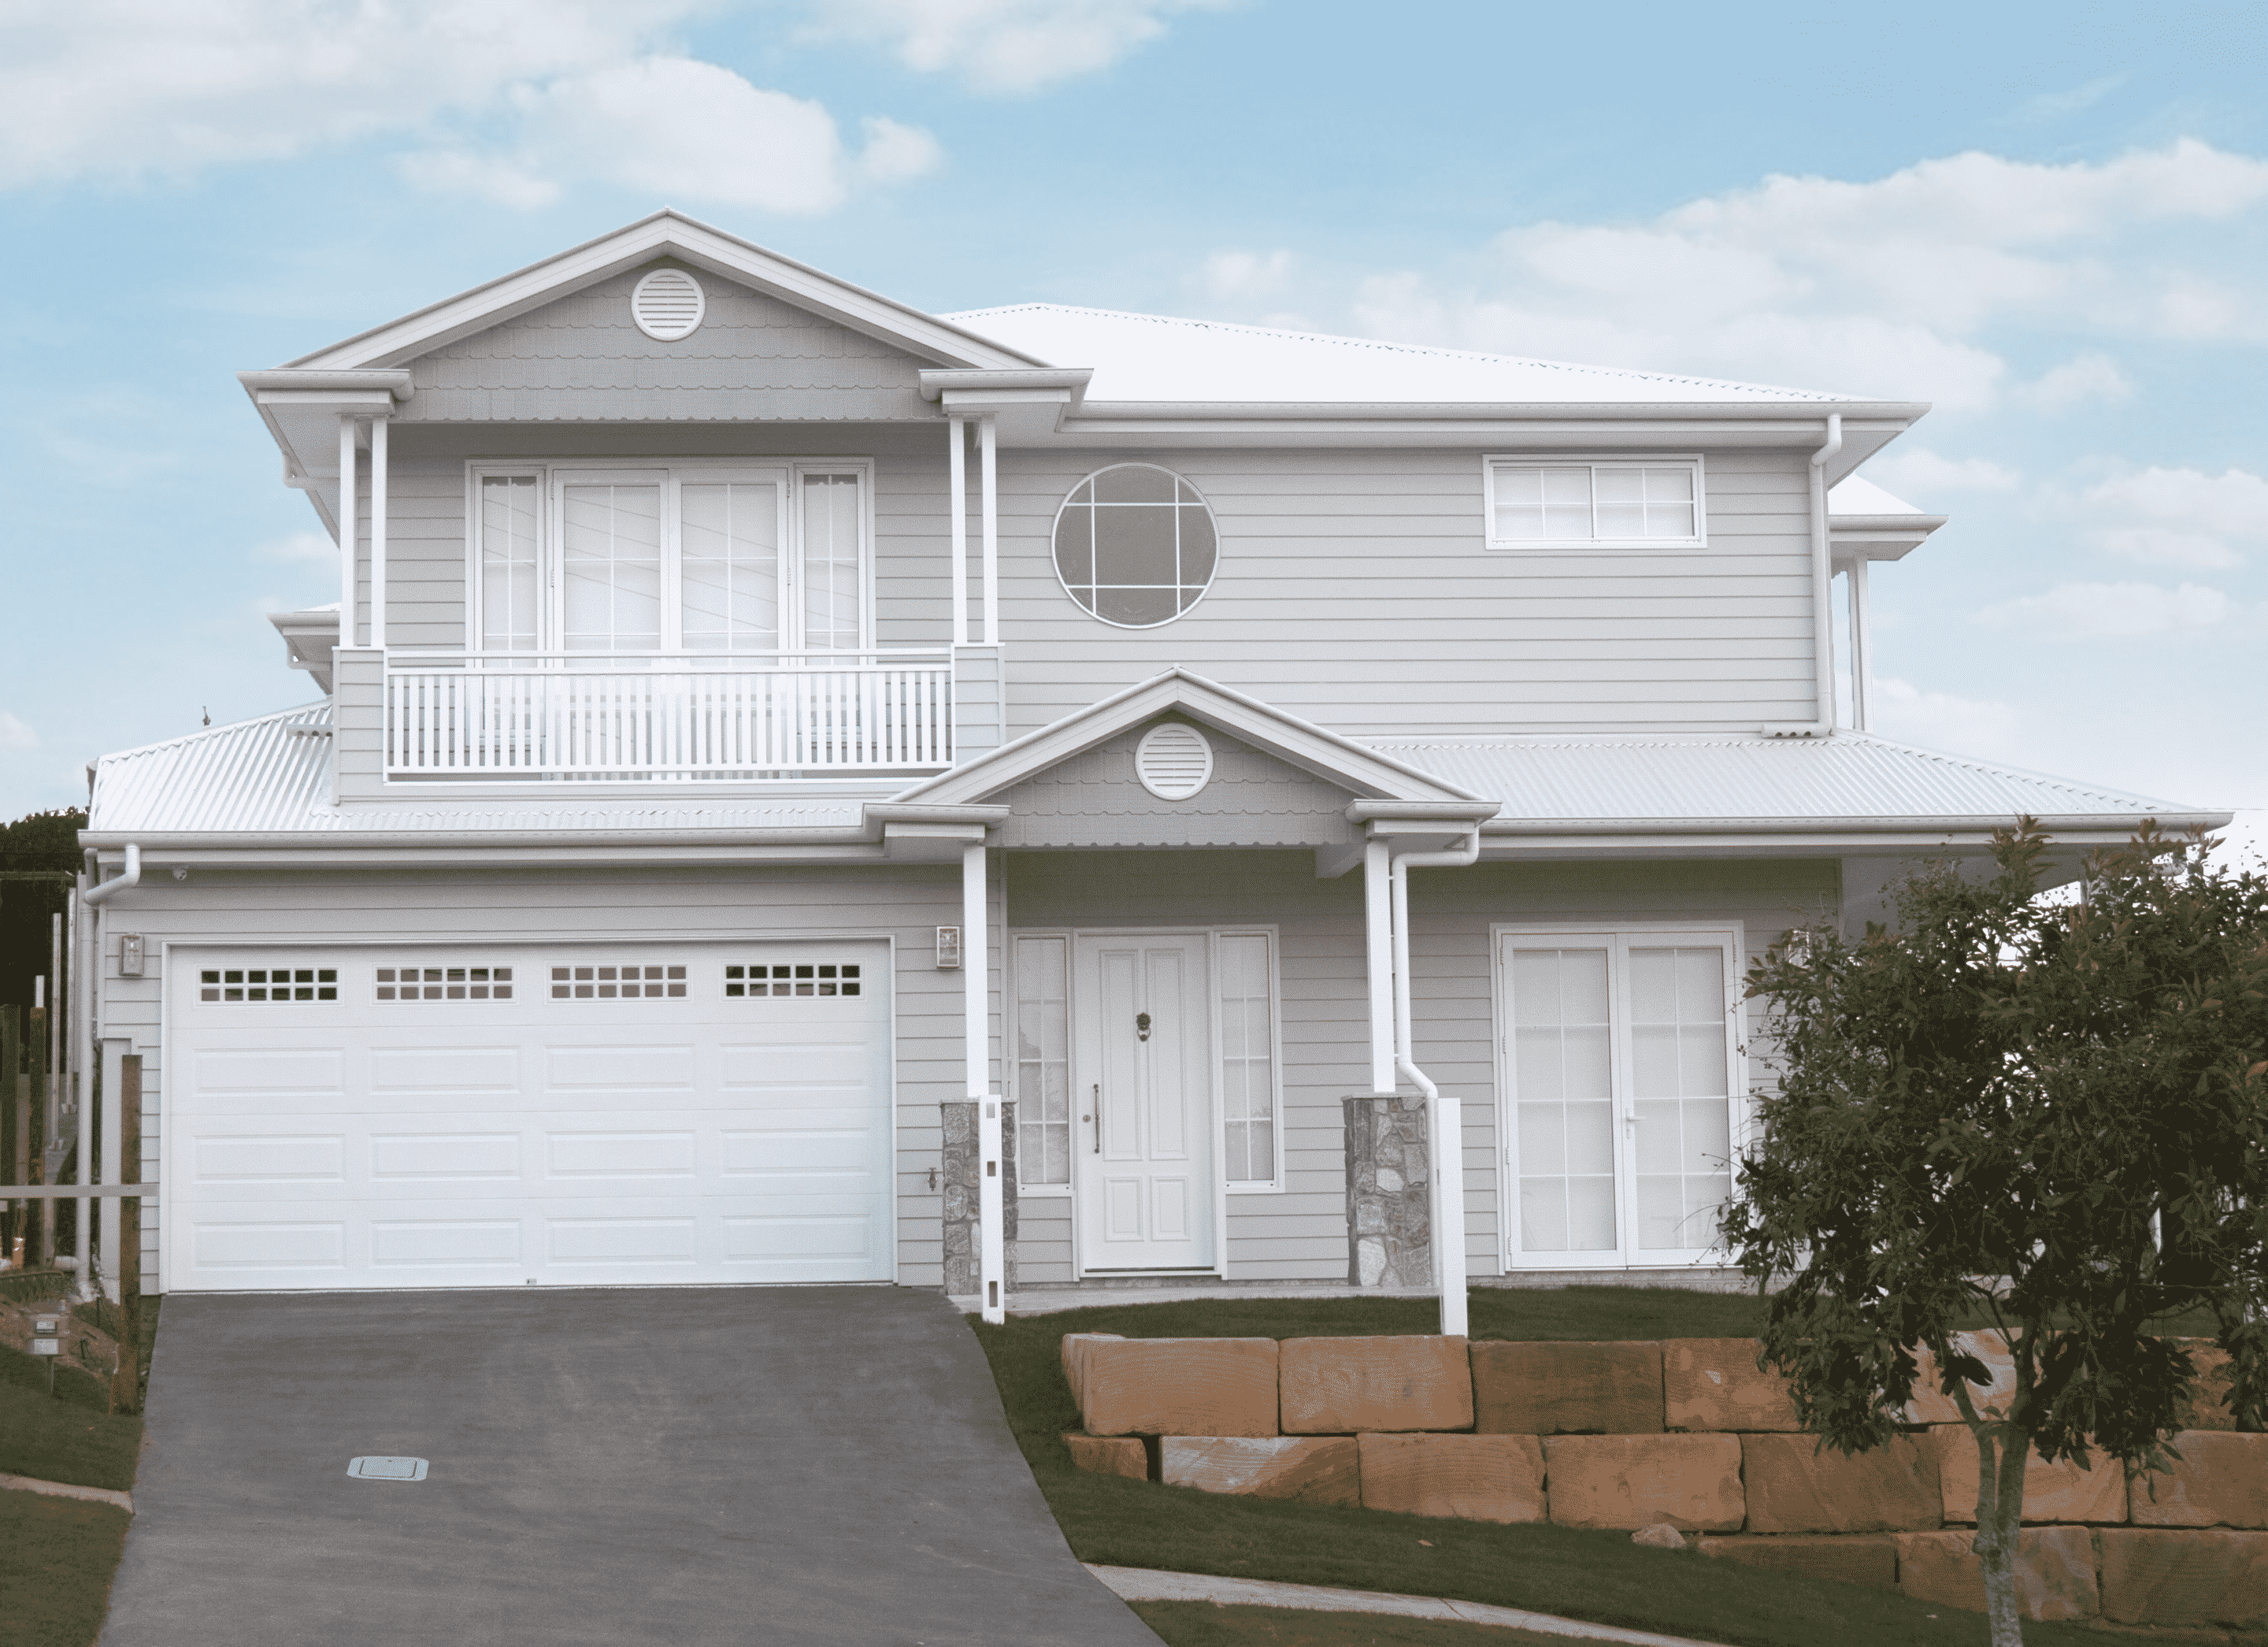 Large House with Centurion White garage doors